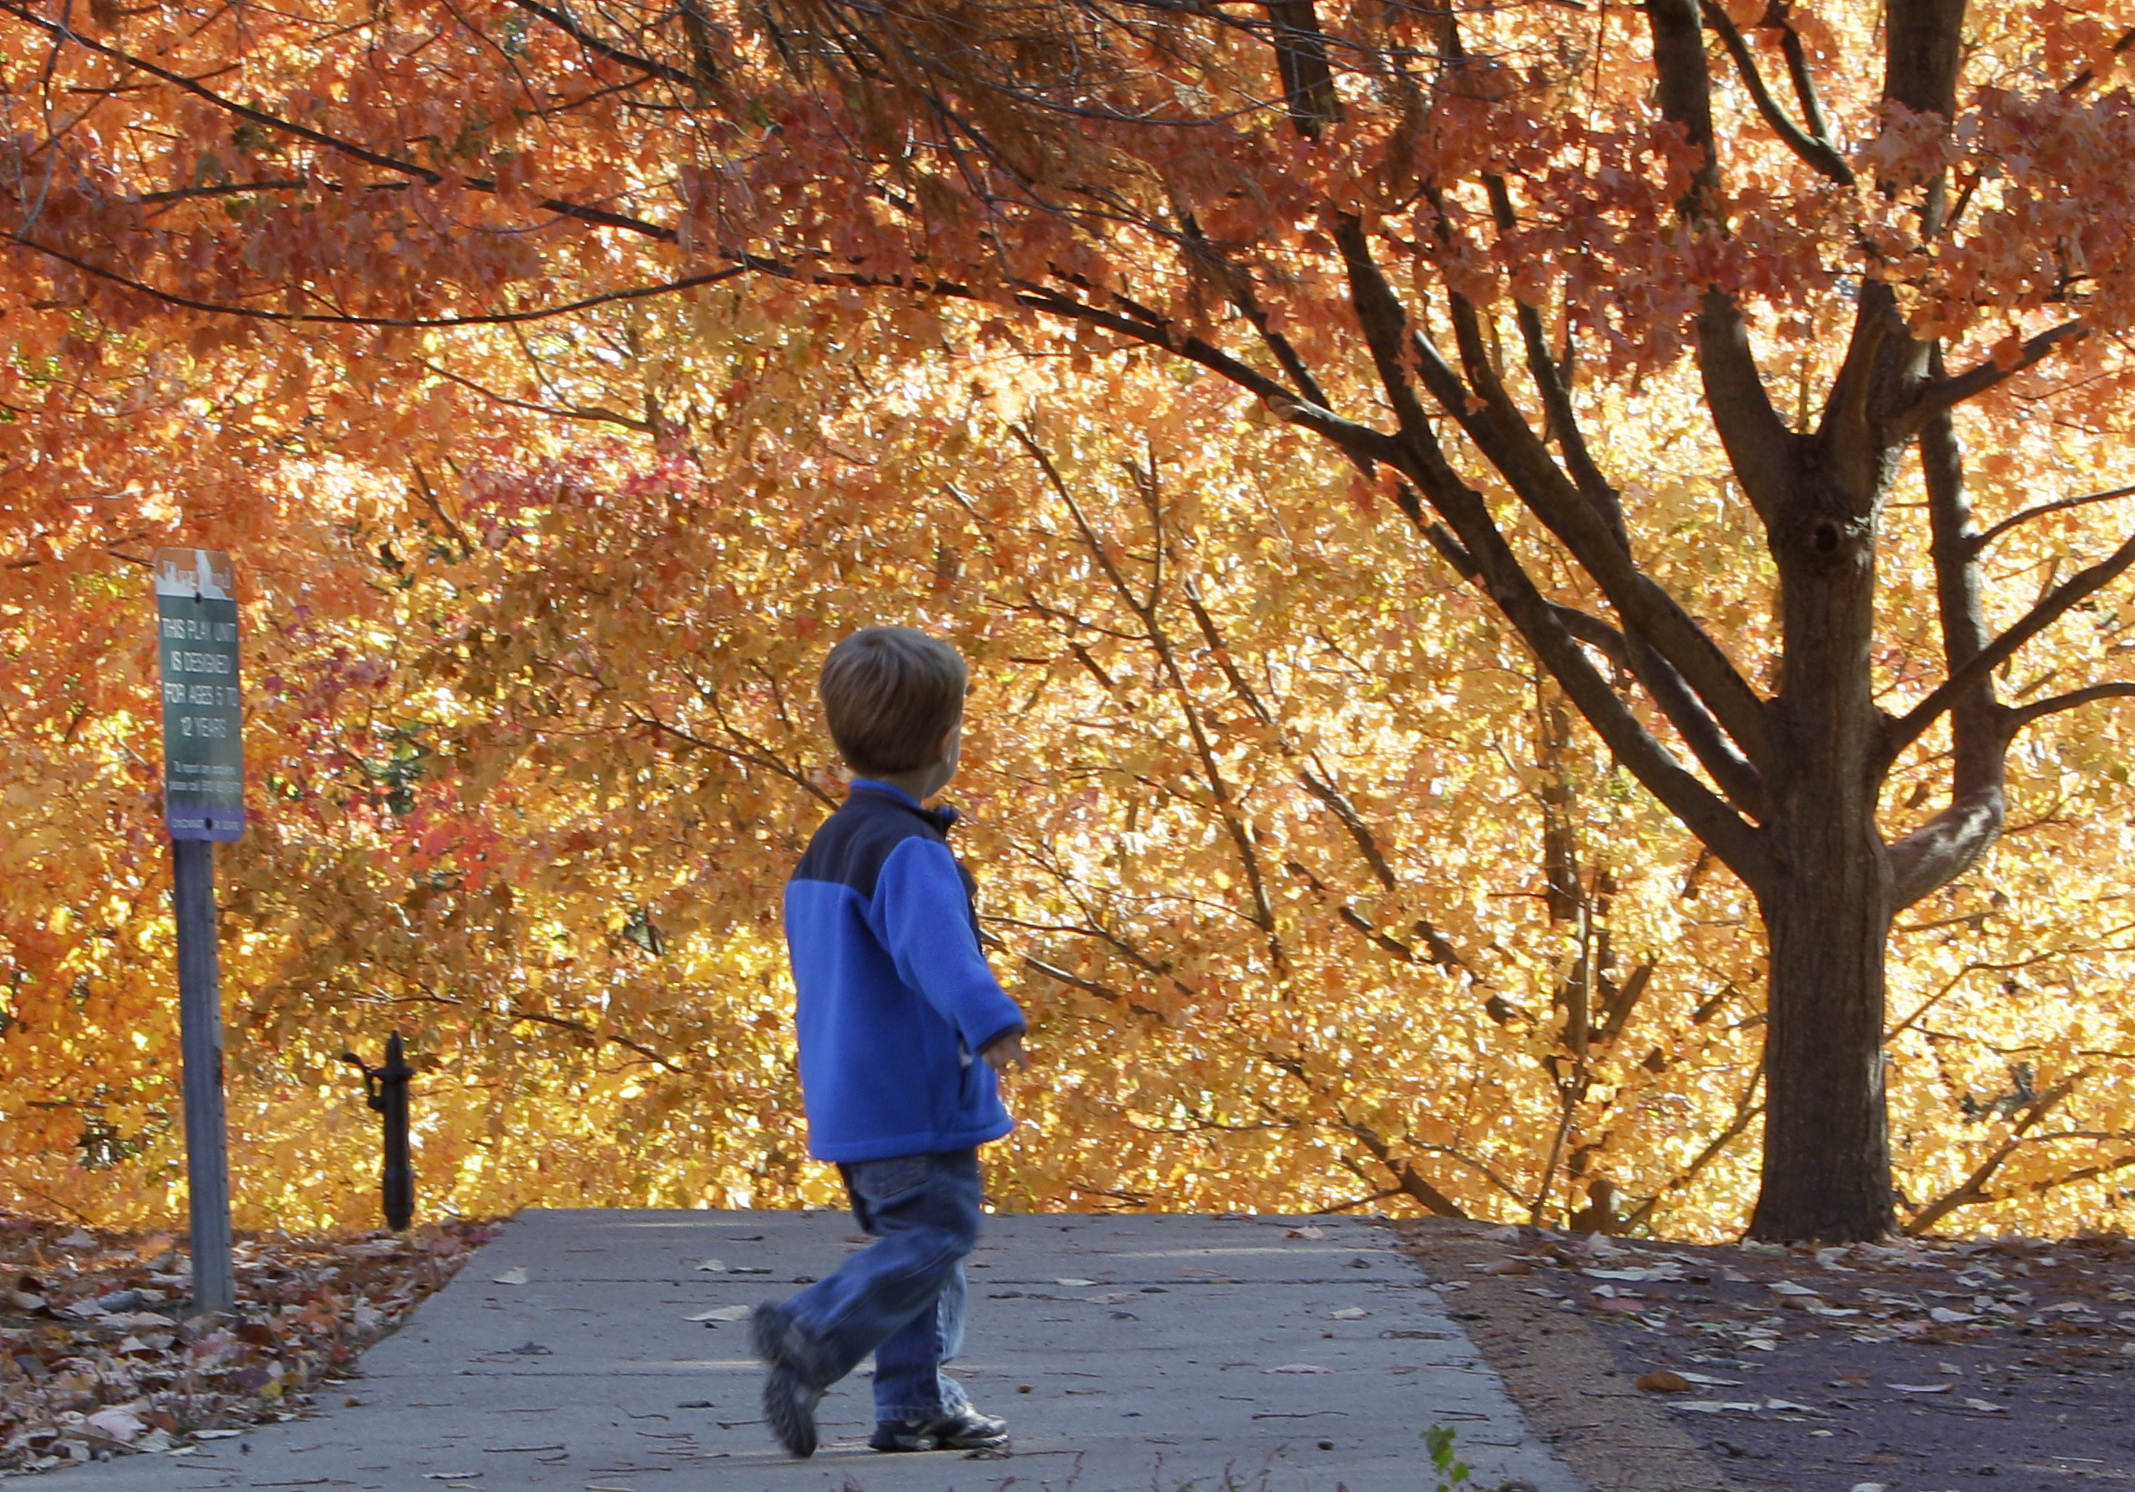 A child plays in a park with trees changing color for fall